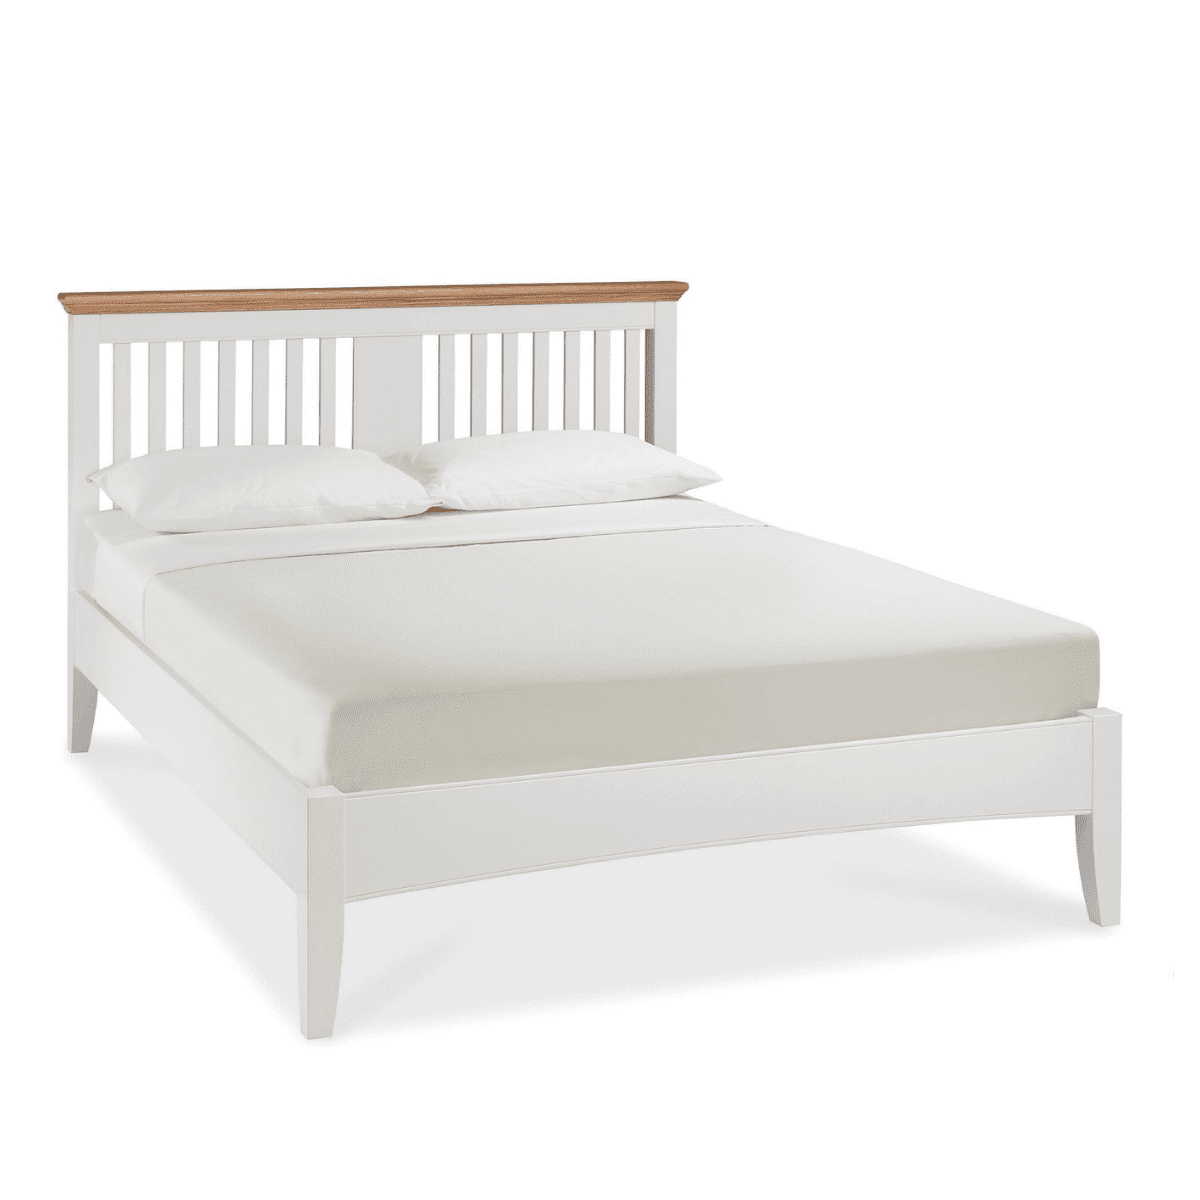 Hanoi Painted Bed Frame